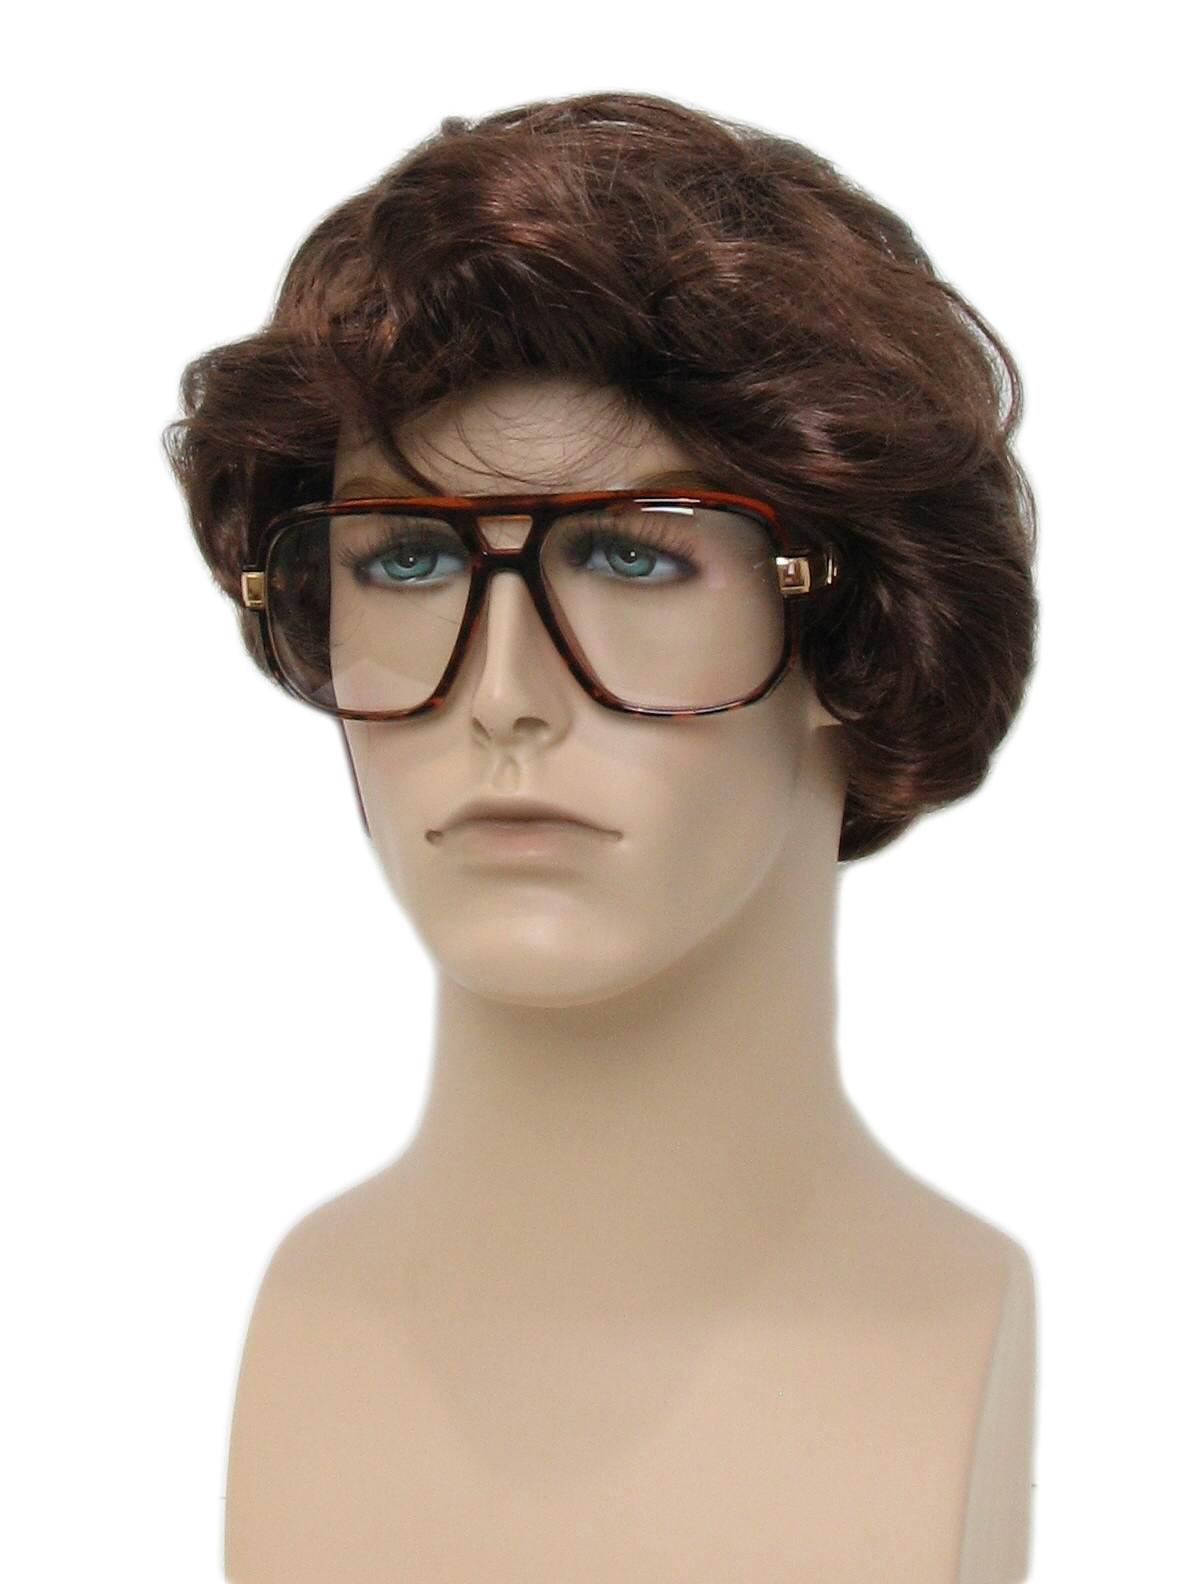 Vintage 1980's Glasses: 80s Style (made recently) -No Label- Mens ...